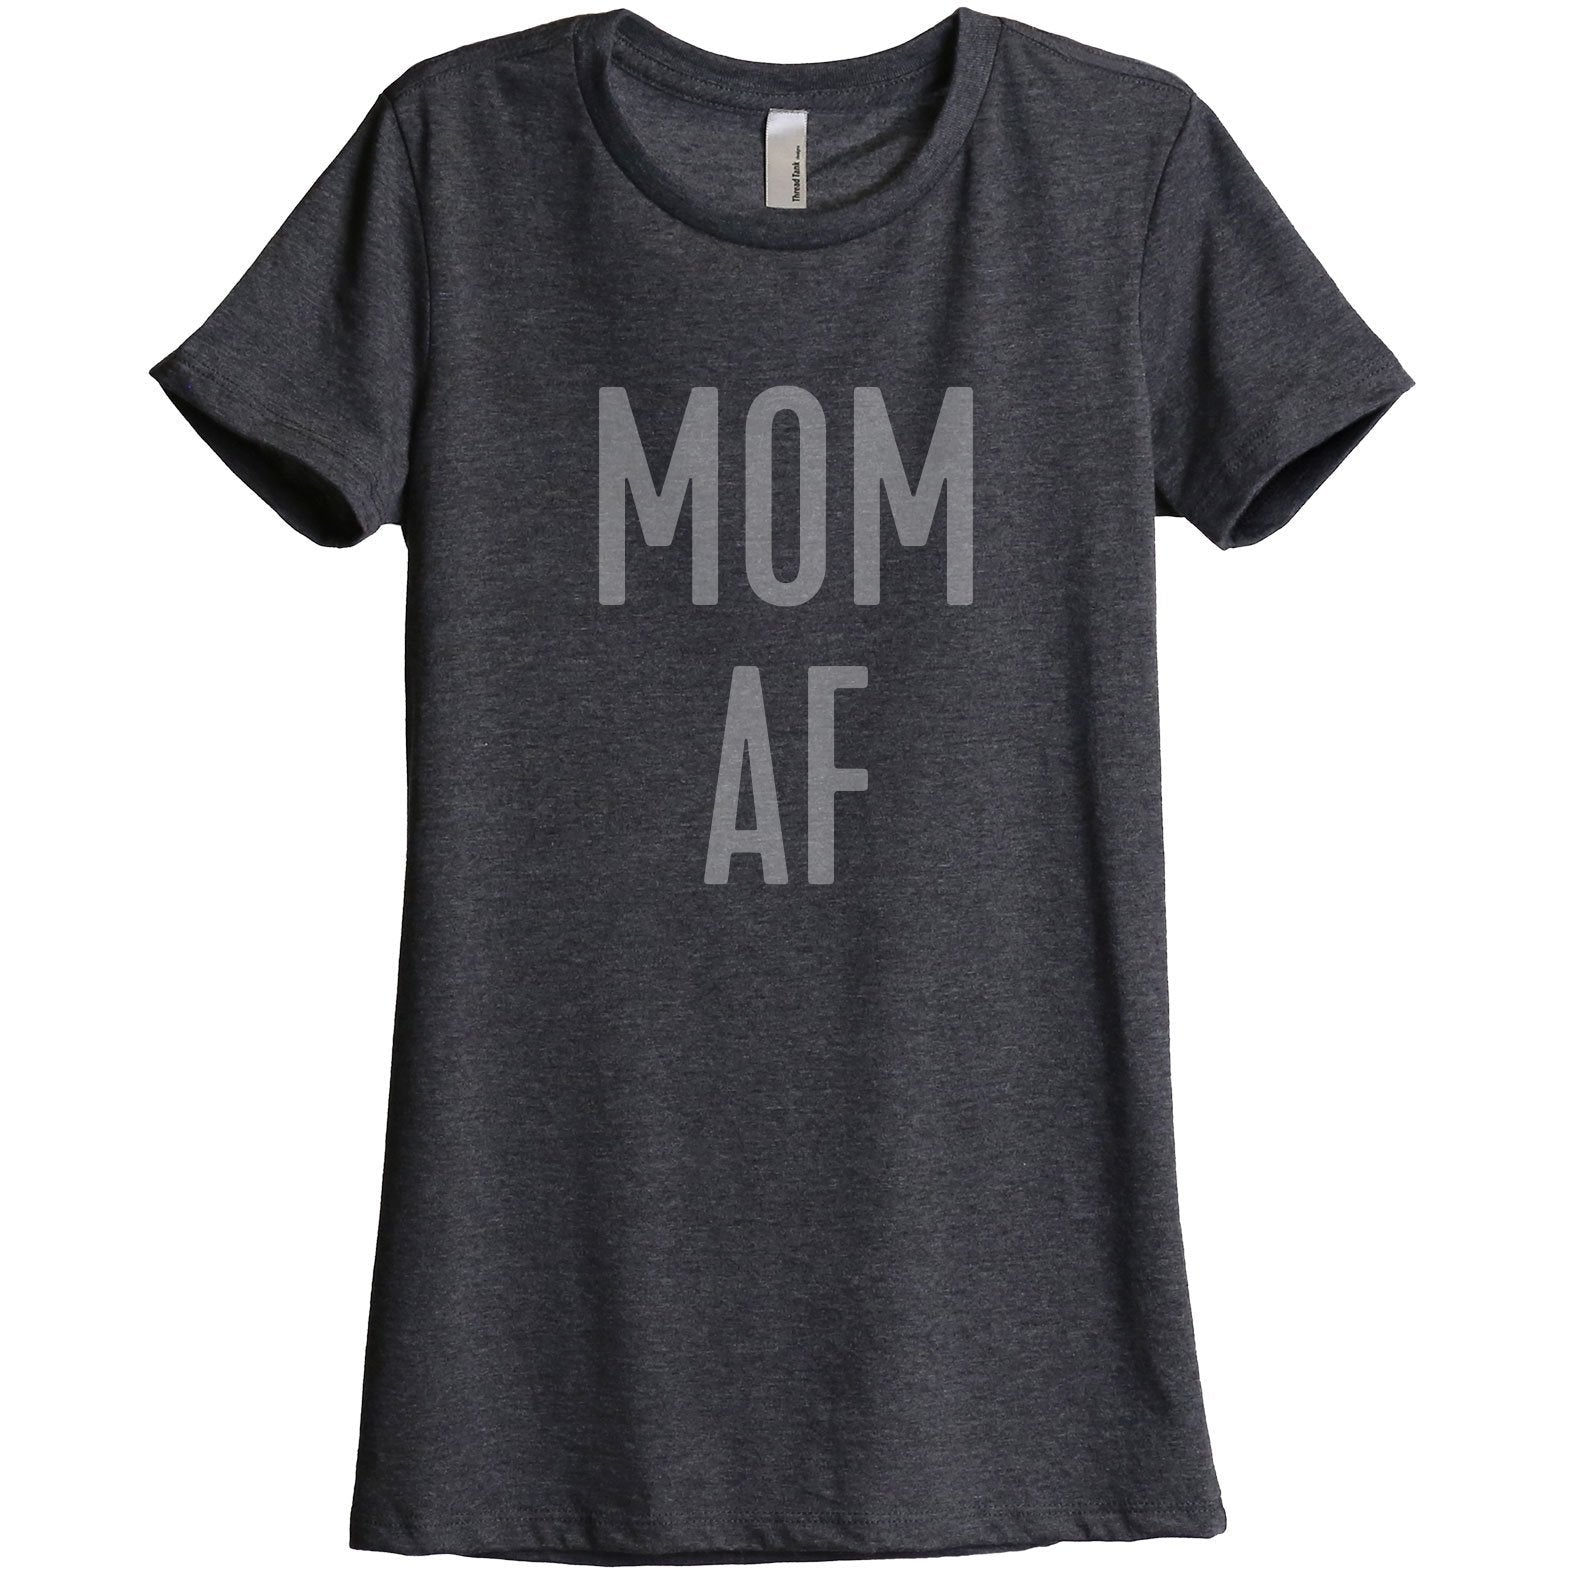 Mom AF Women's Relaxed Crewneck T-Shirt Top Tee Charcoal Grey
